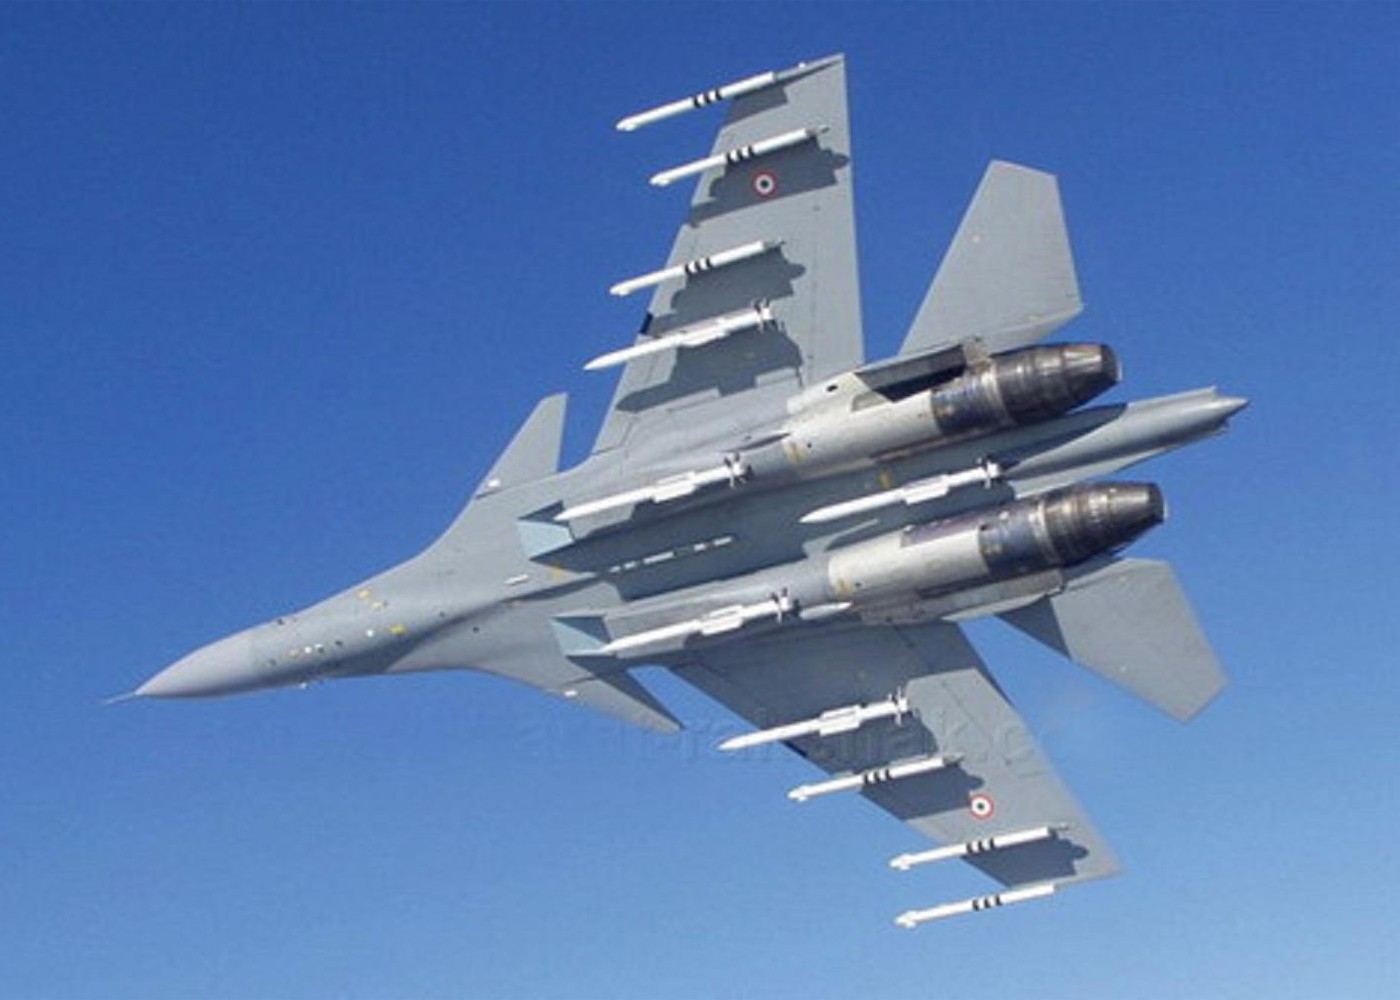 Outranged & Outgunned by PAF AMRAAM missiles, IAF Plans To Arm Its SU-30MKI  With Israeli missile